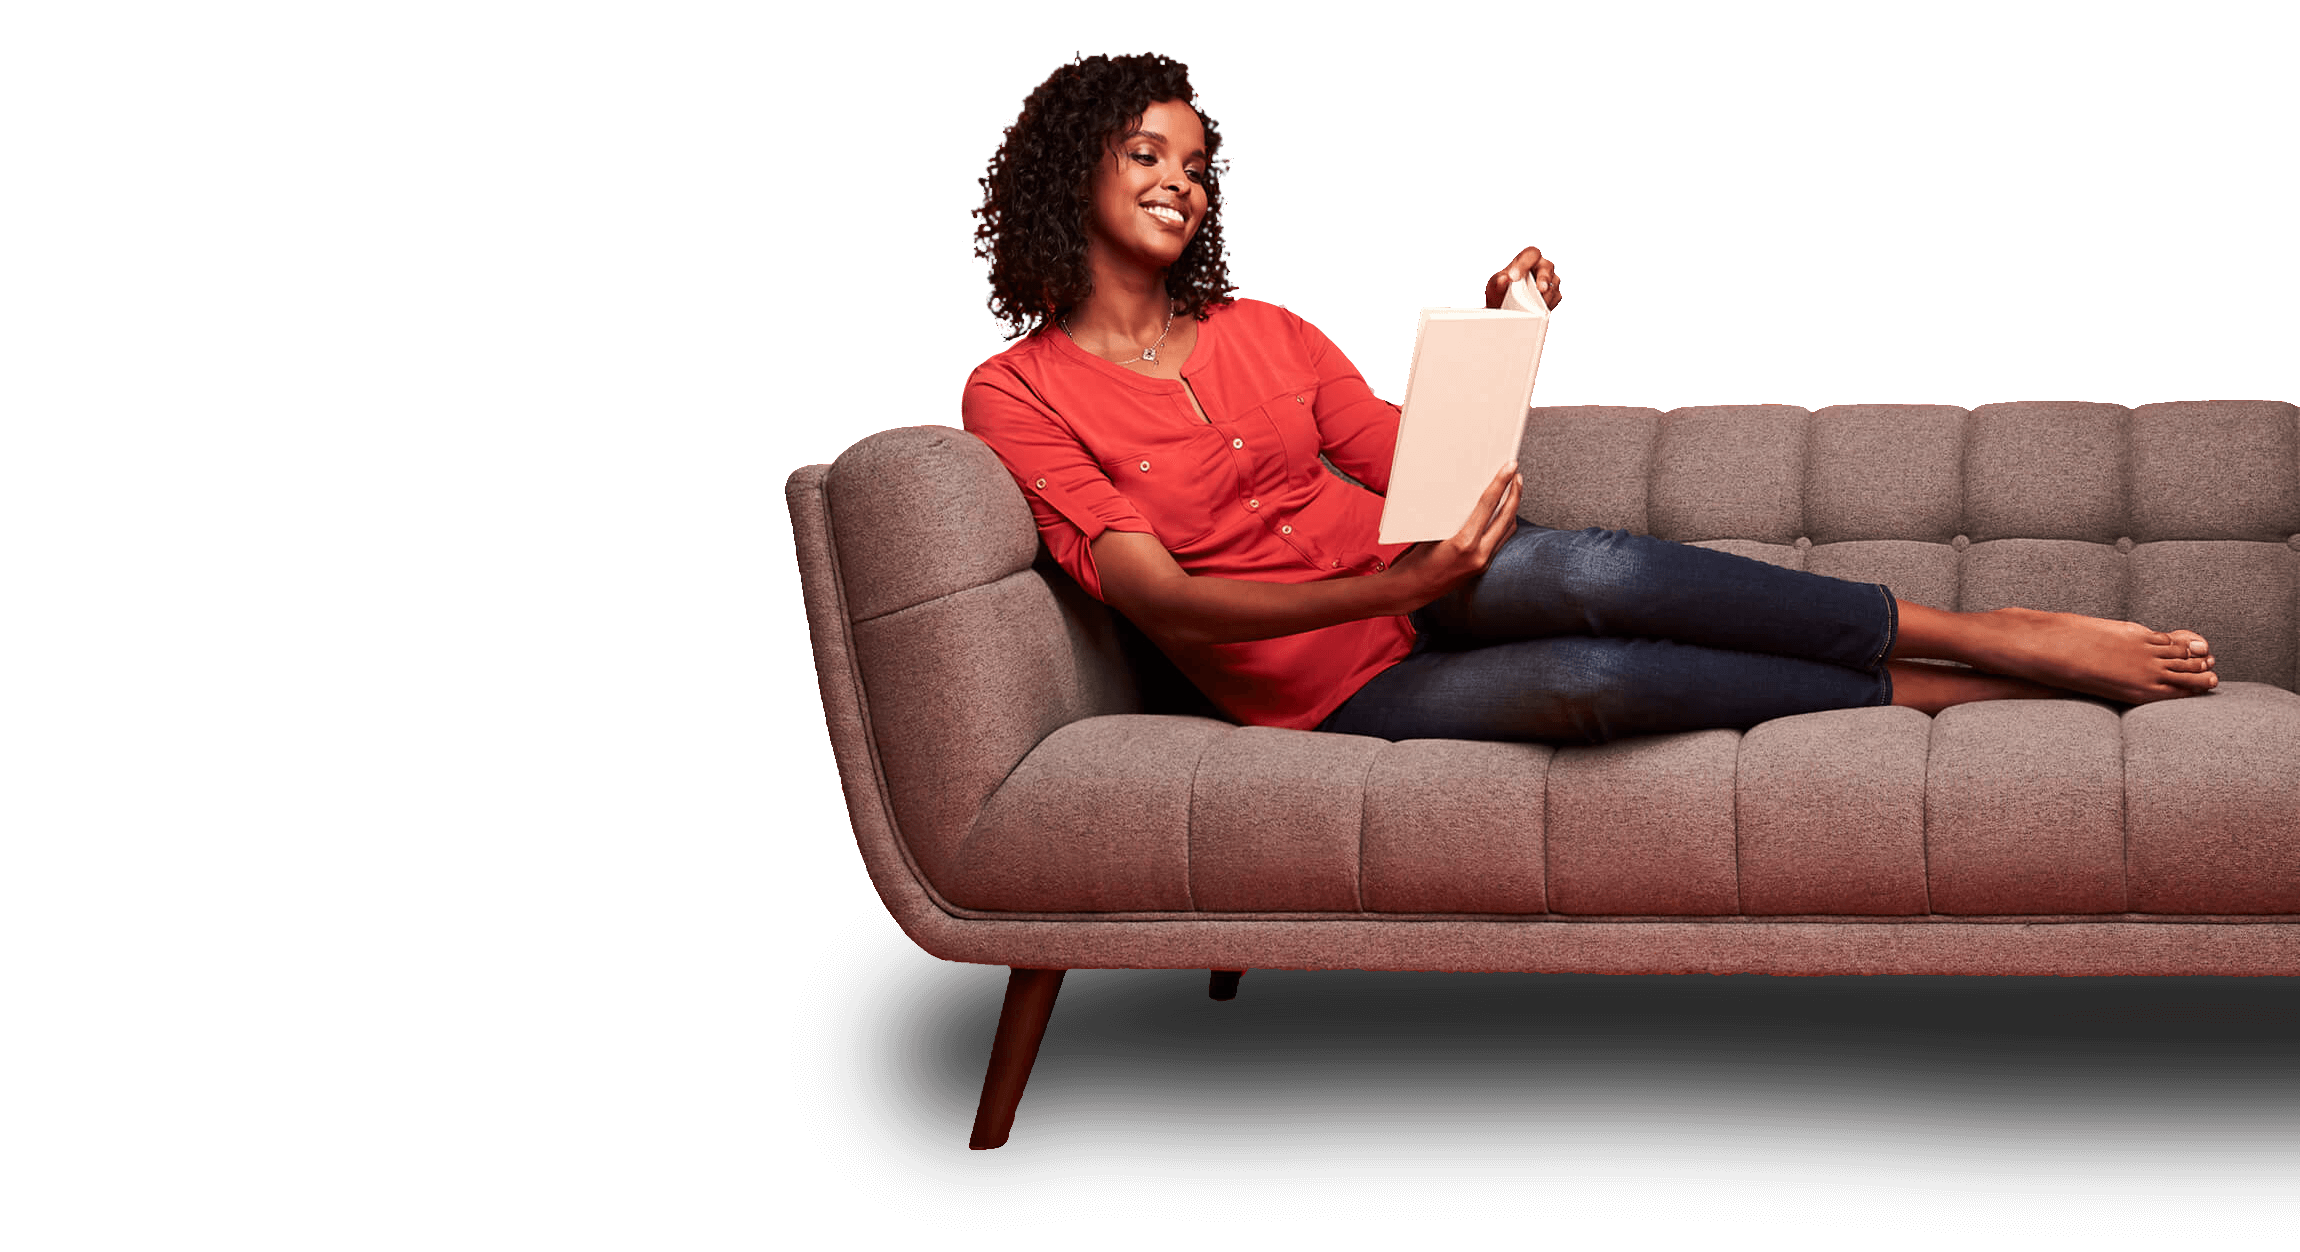 Woman sitting on a couch reading